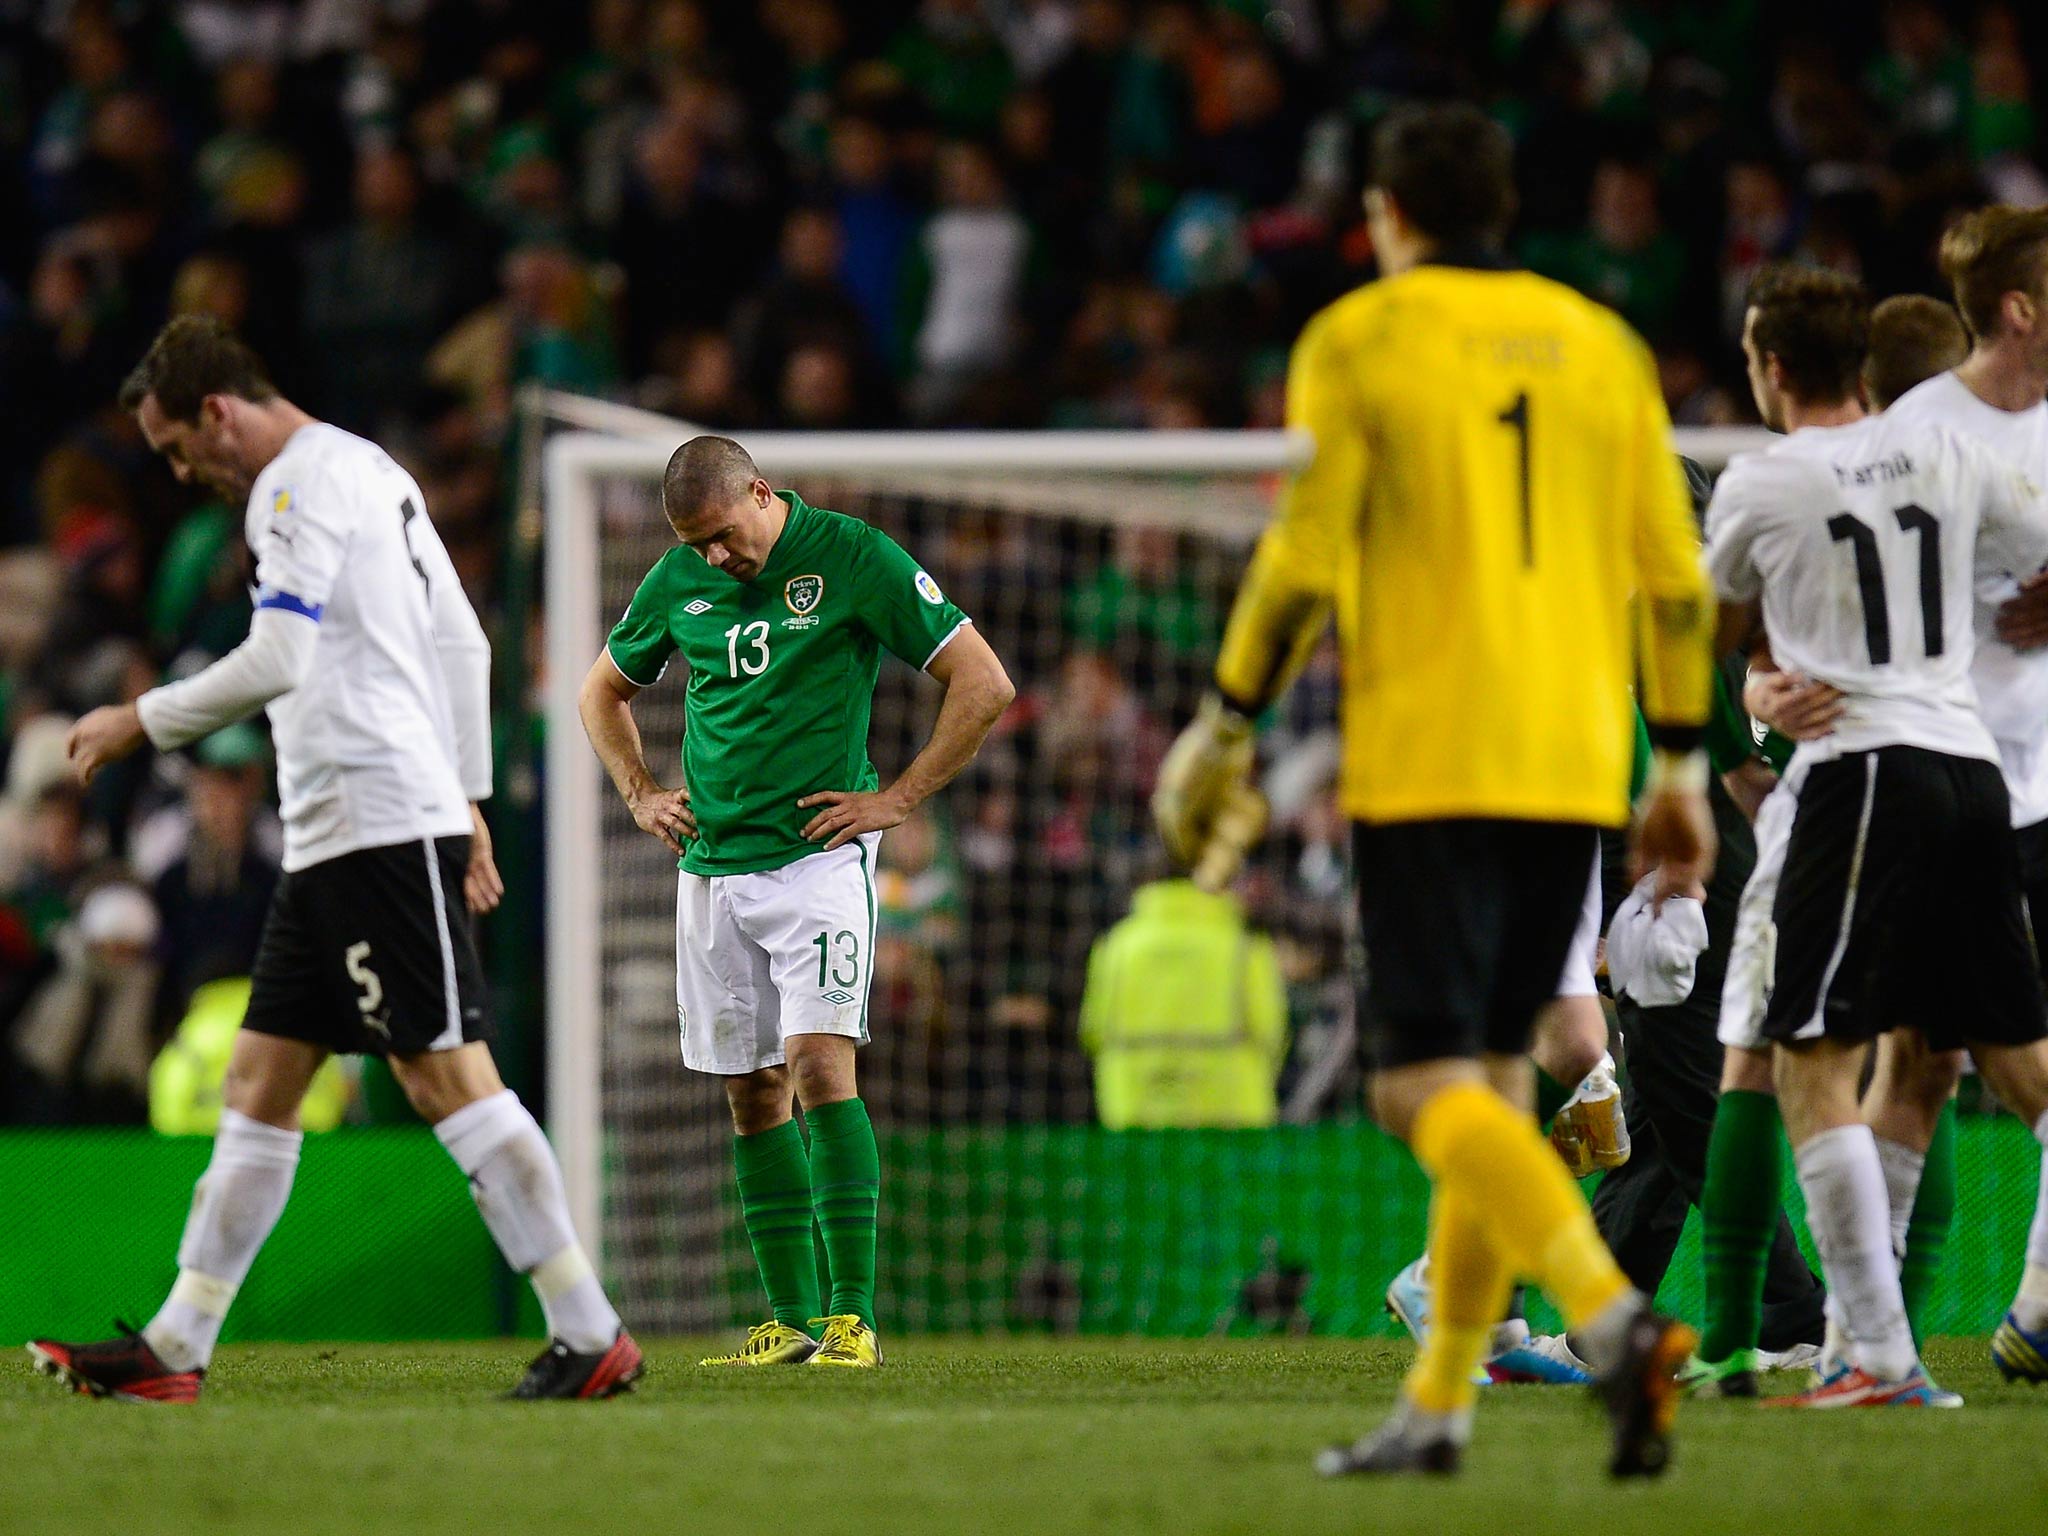 Ireland player Jonathan Walters looks dejected at the end of Ireland's 2-2 draw with Austria